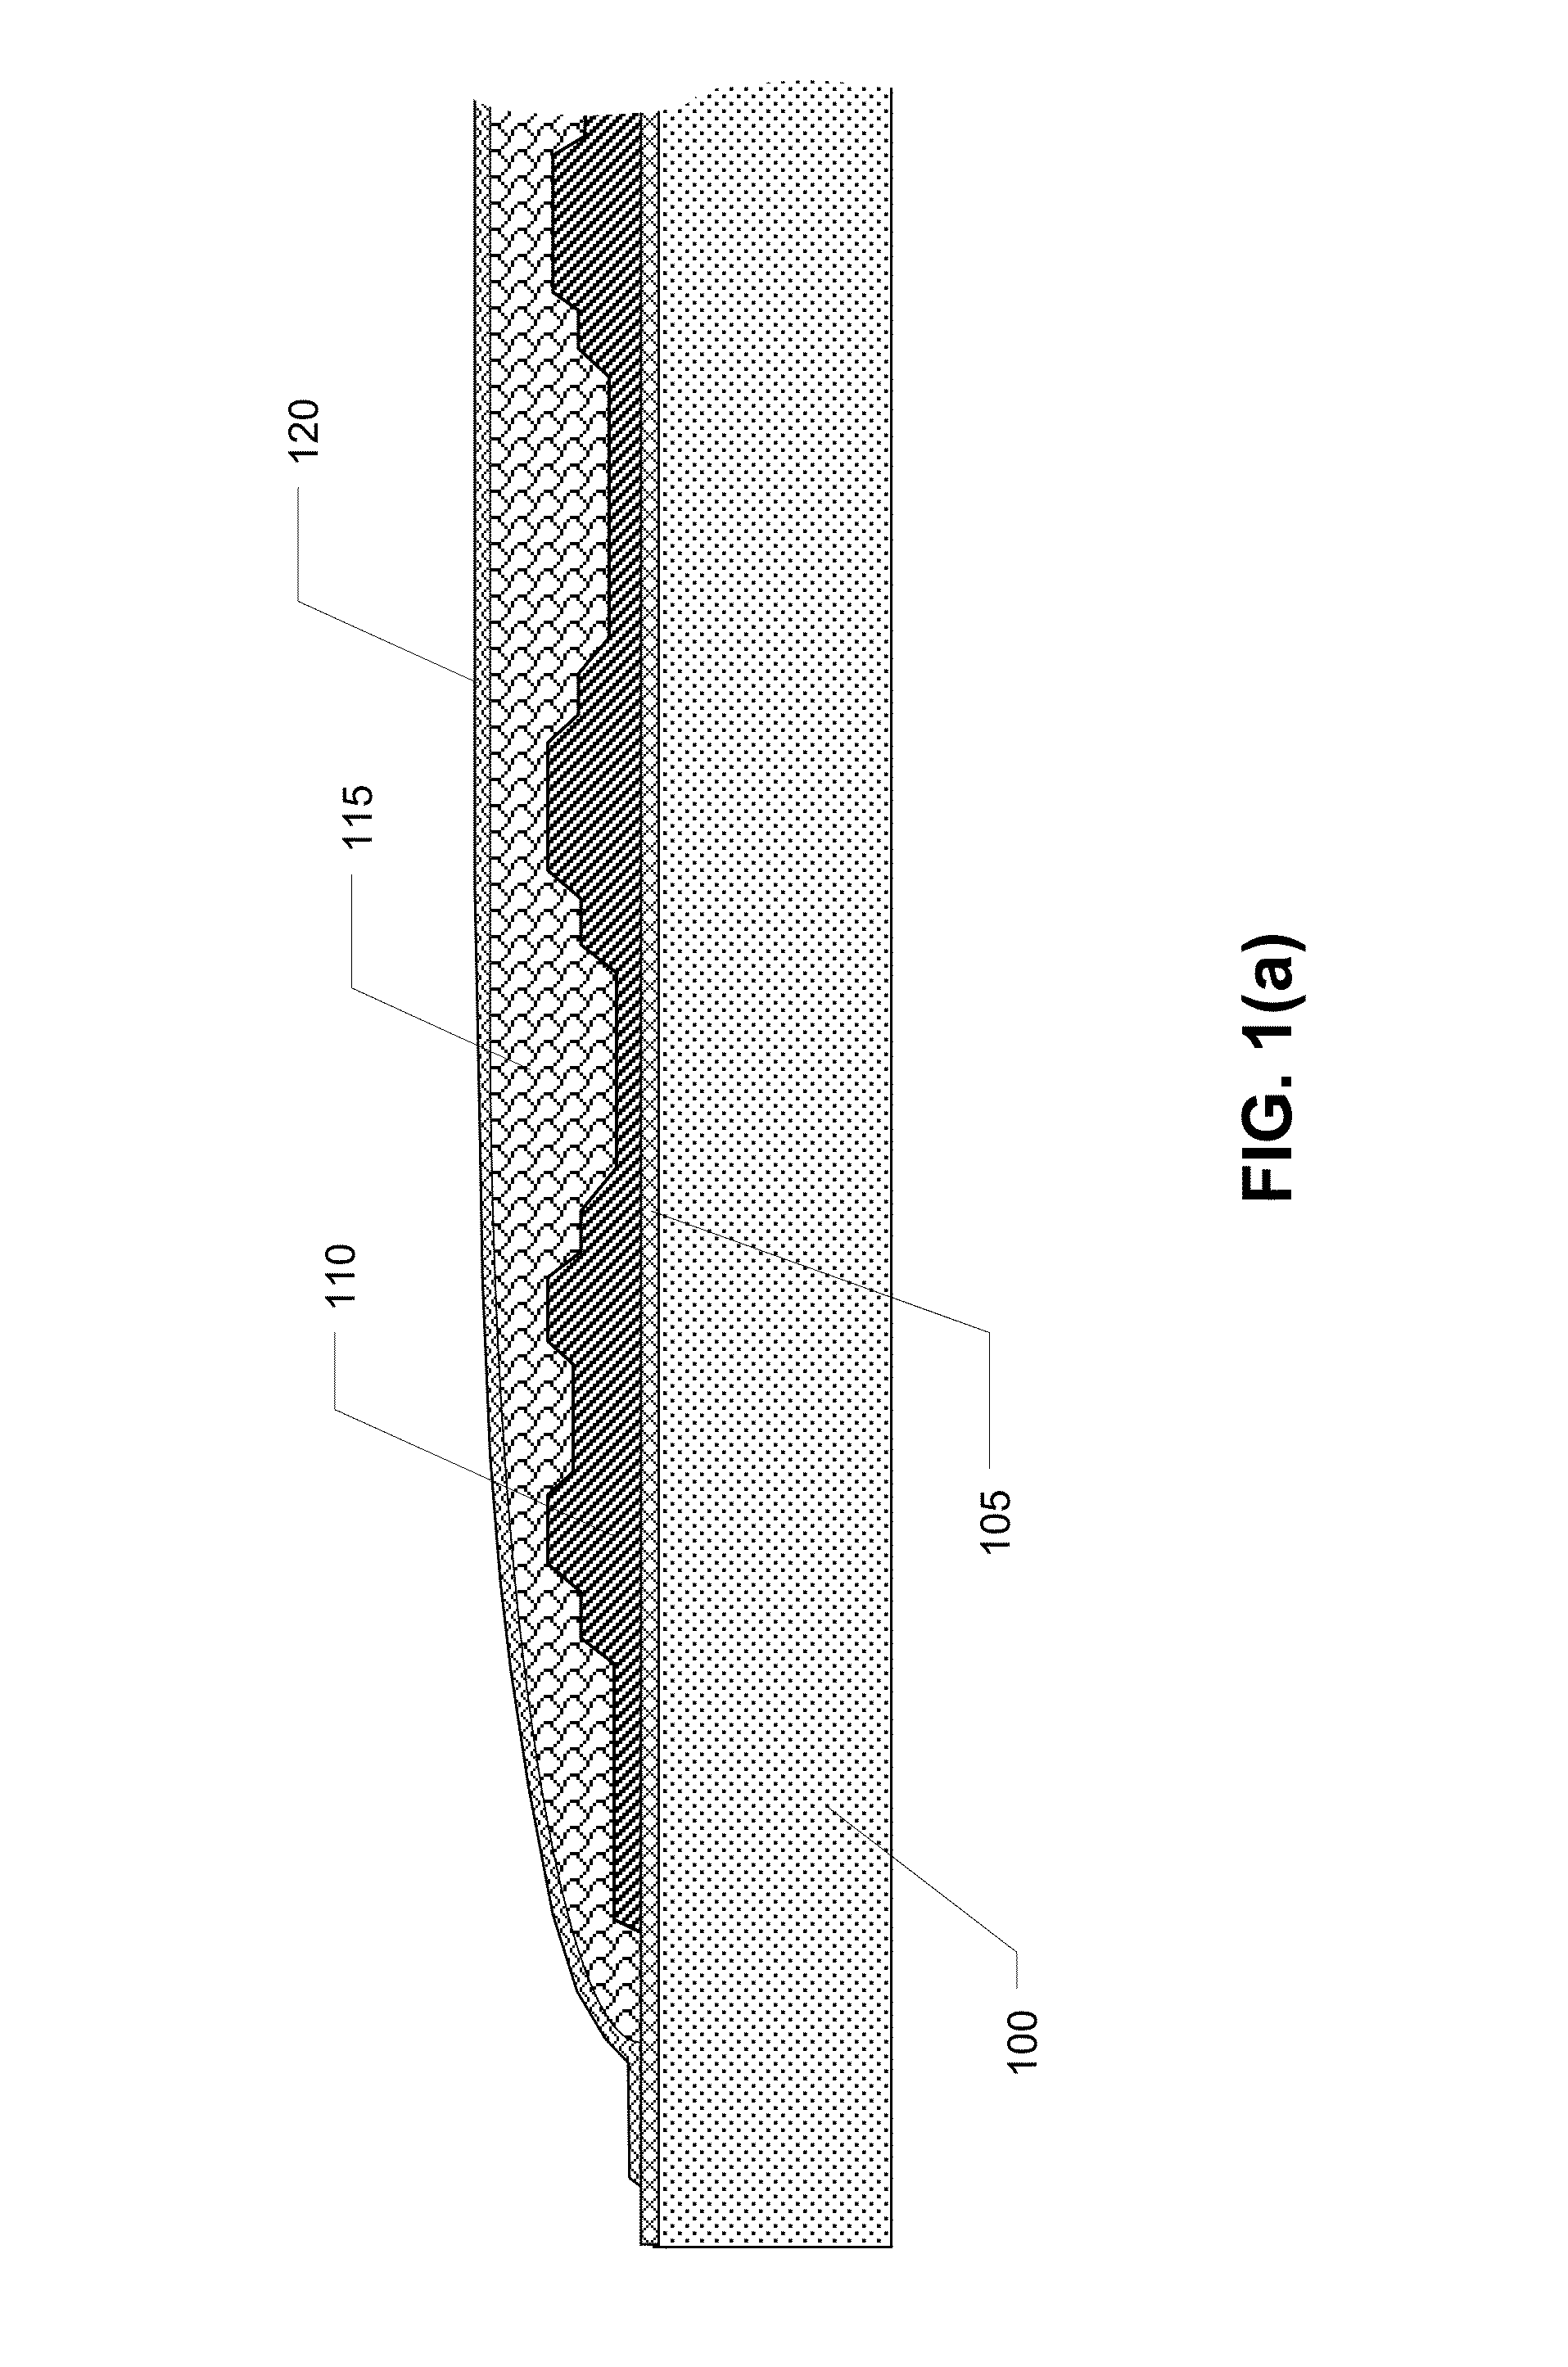 Method for deposition of high-performance coatings and encapsulated electronic devices